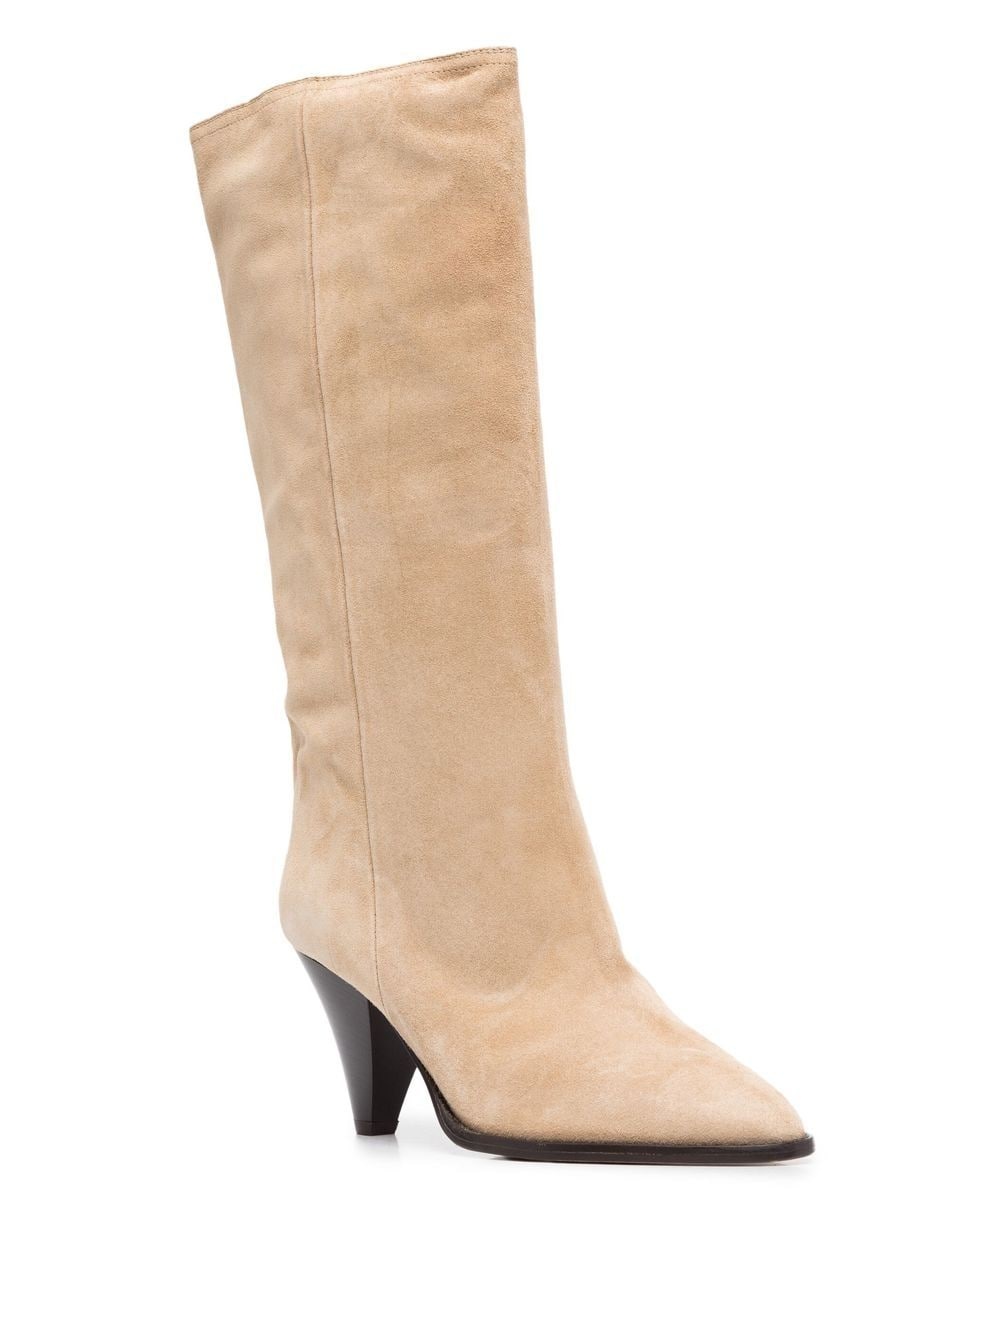 80mm heeled suede boots - 2